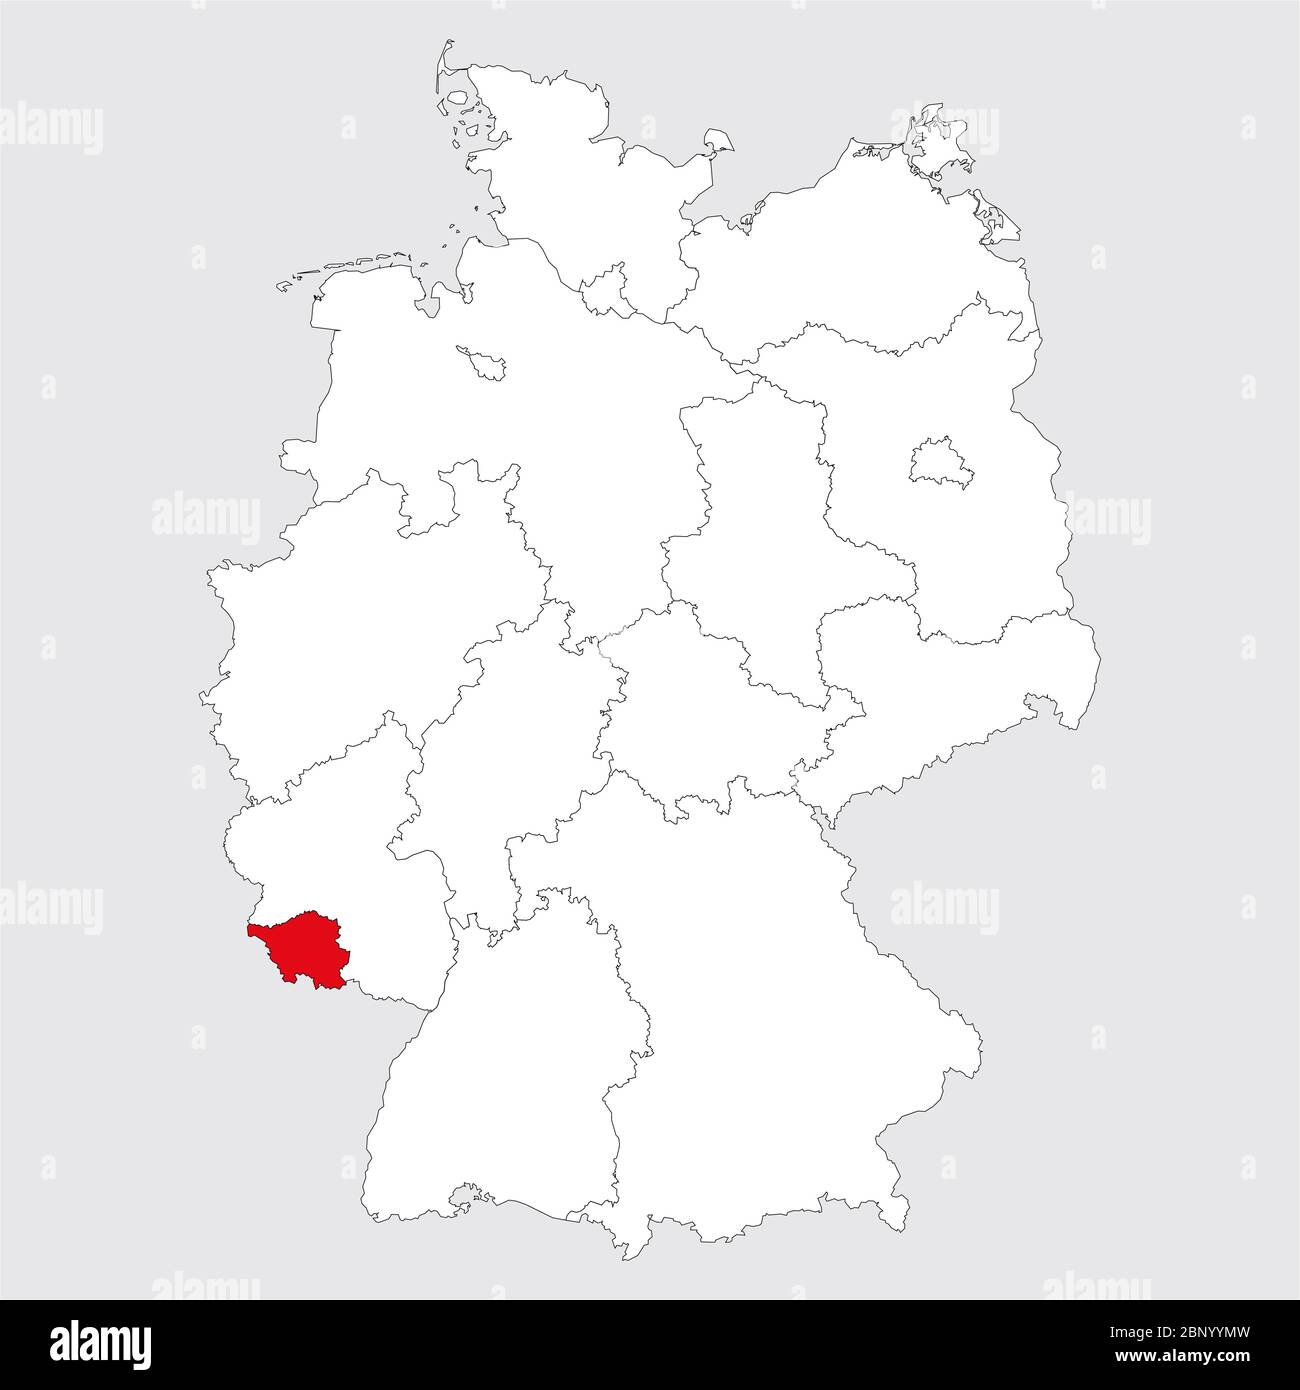 Saarland province highlighted on germany map. Gray background. German political map. Stock Vector